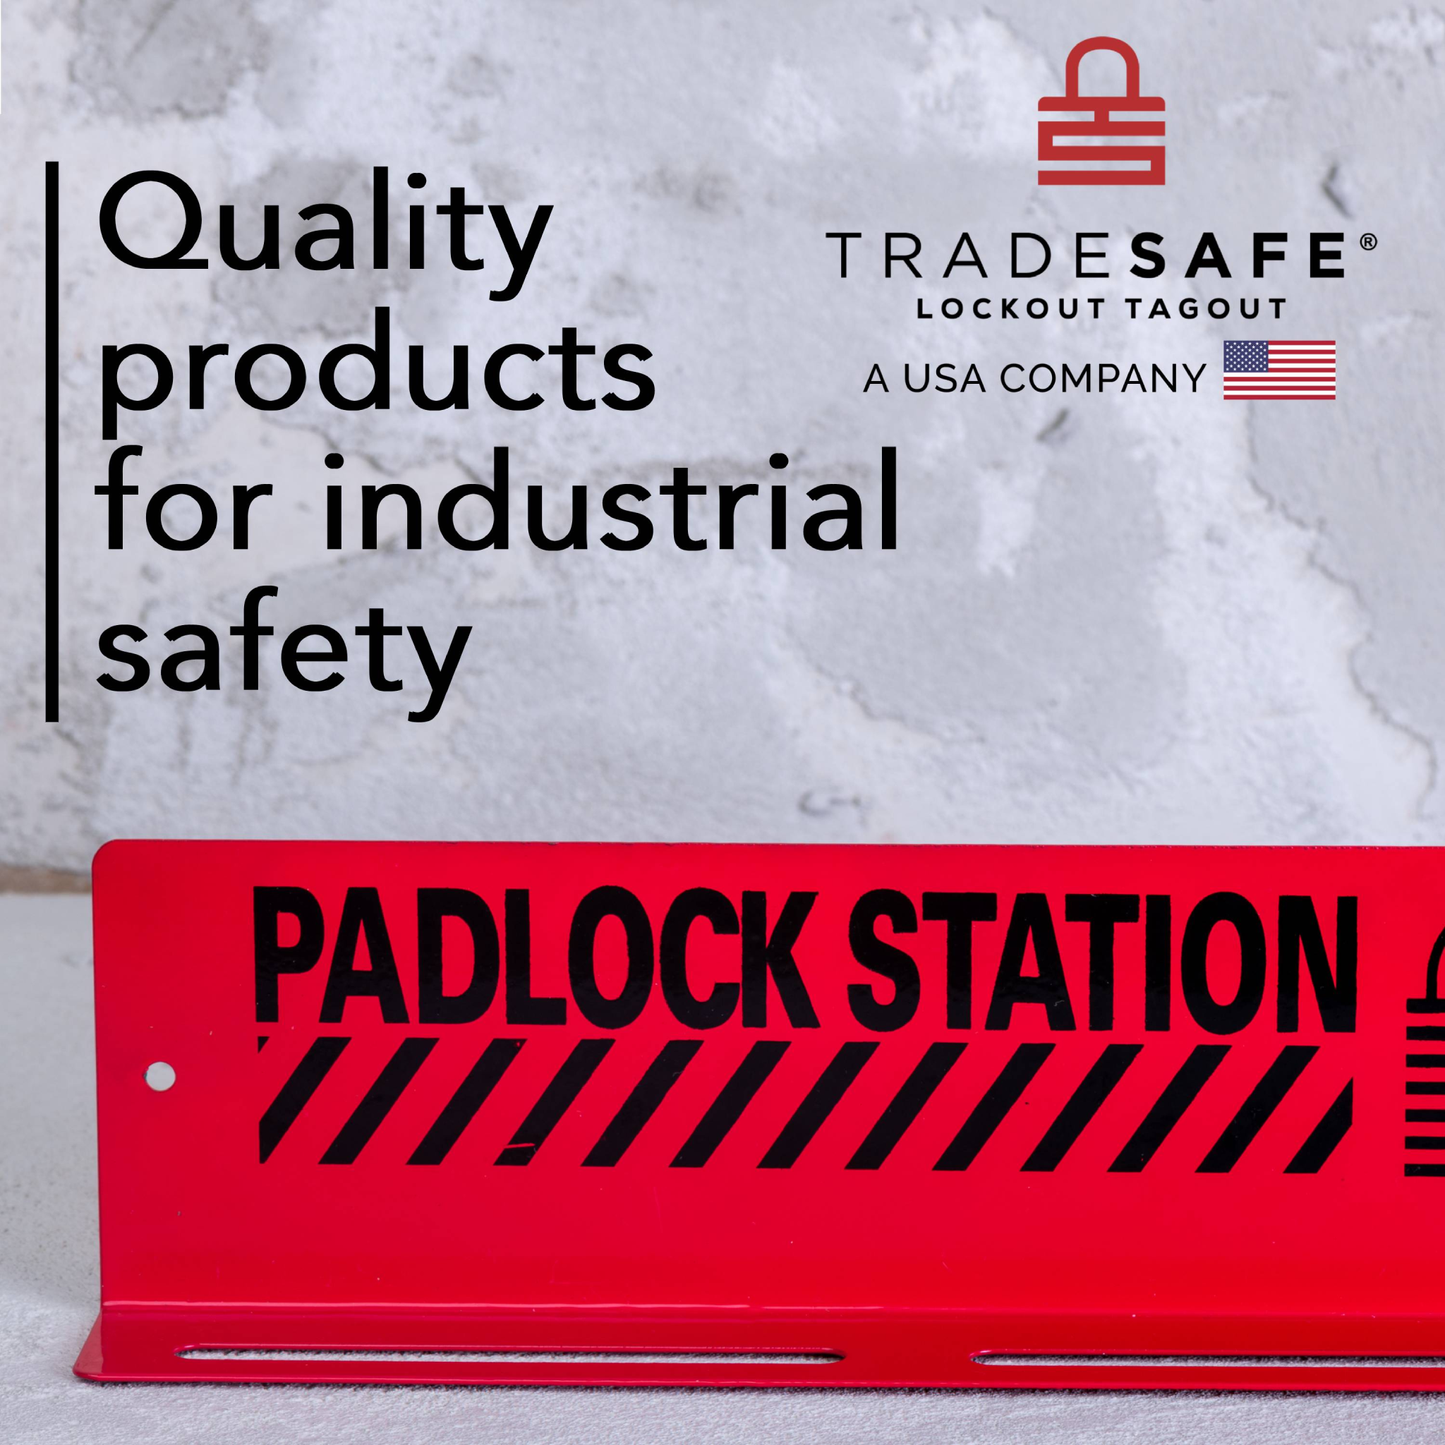 tradesafe lockout tagout padlock station; quality products for industrial safety